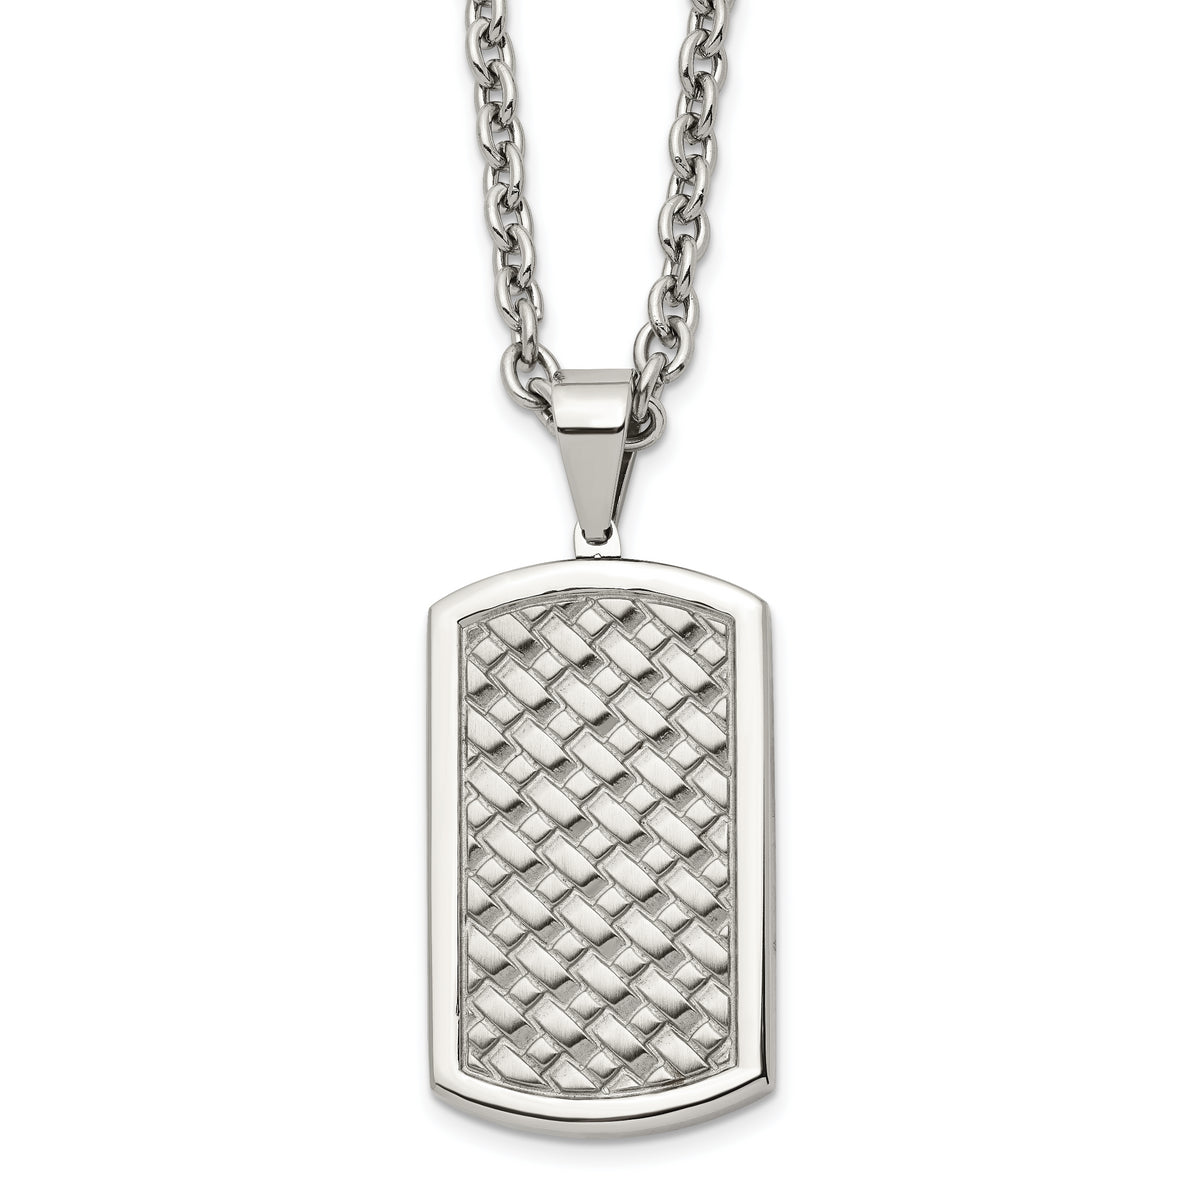 Chisel Stainless Steel Polished Weaved Pattern Dog Tag on a 24 inch Cable Chain Necklace